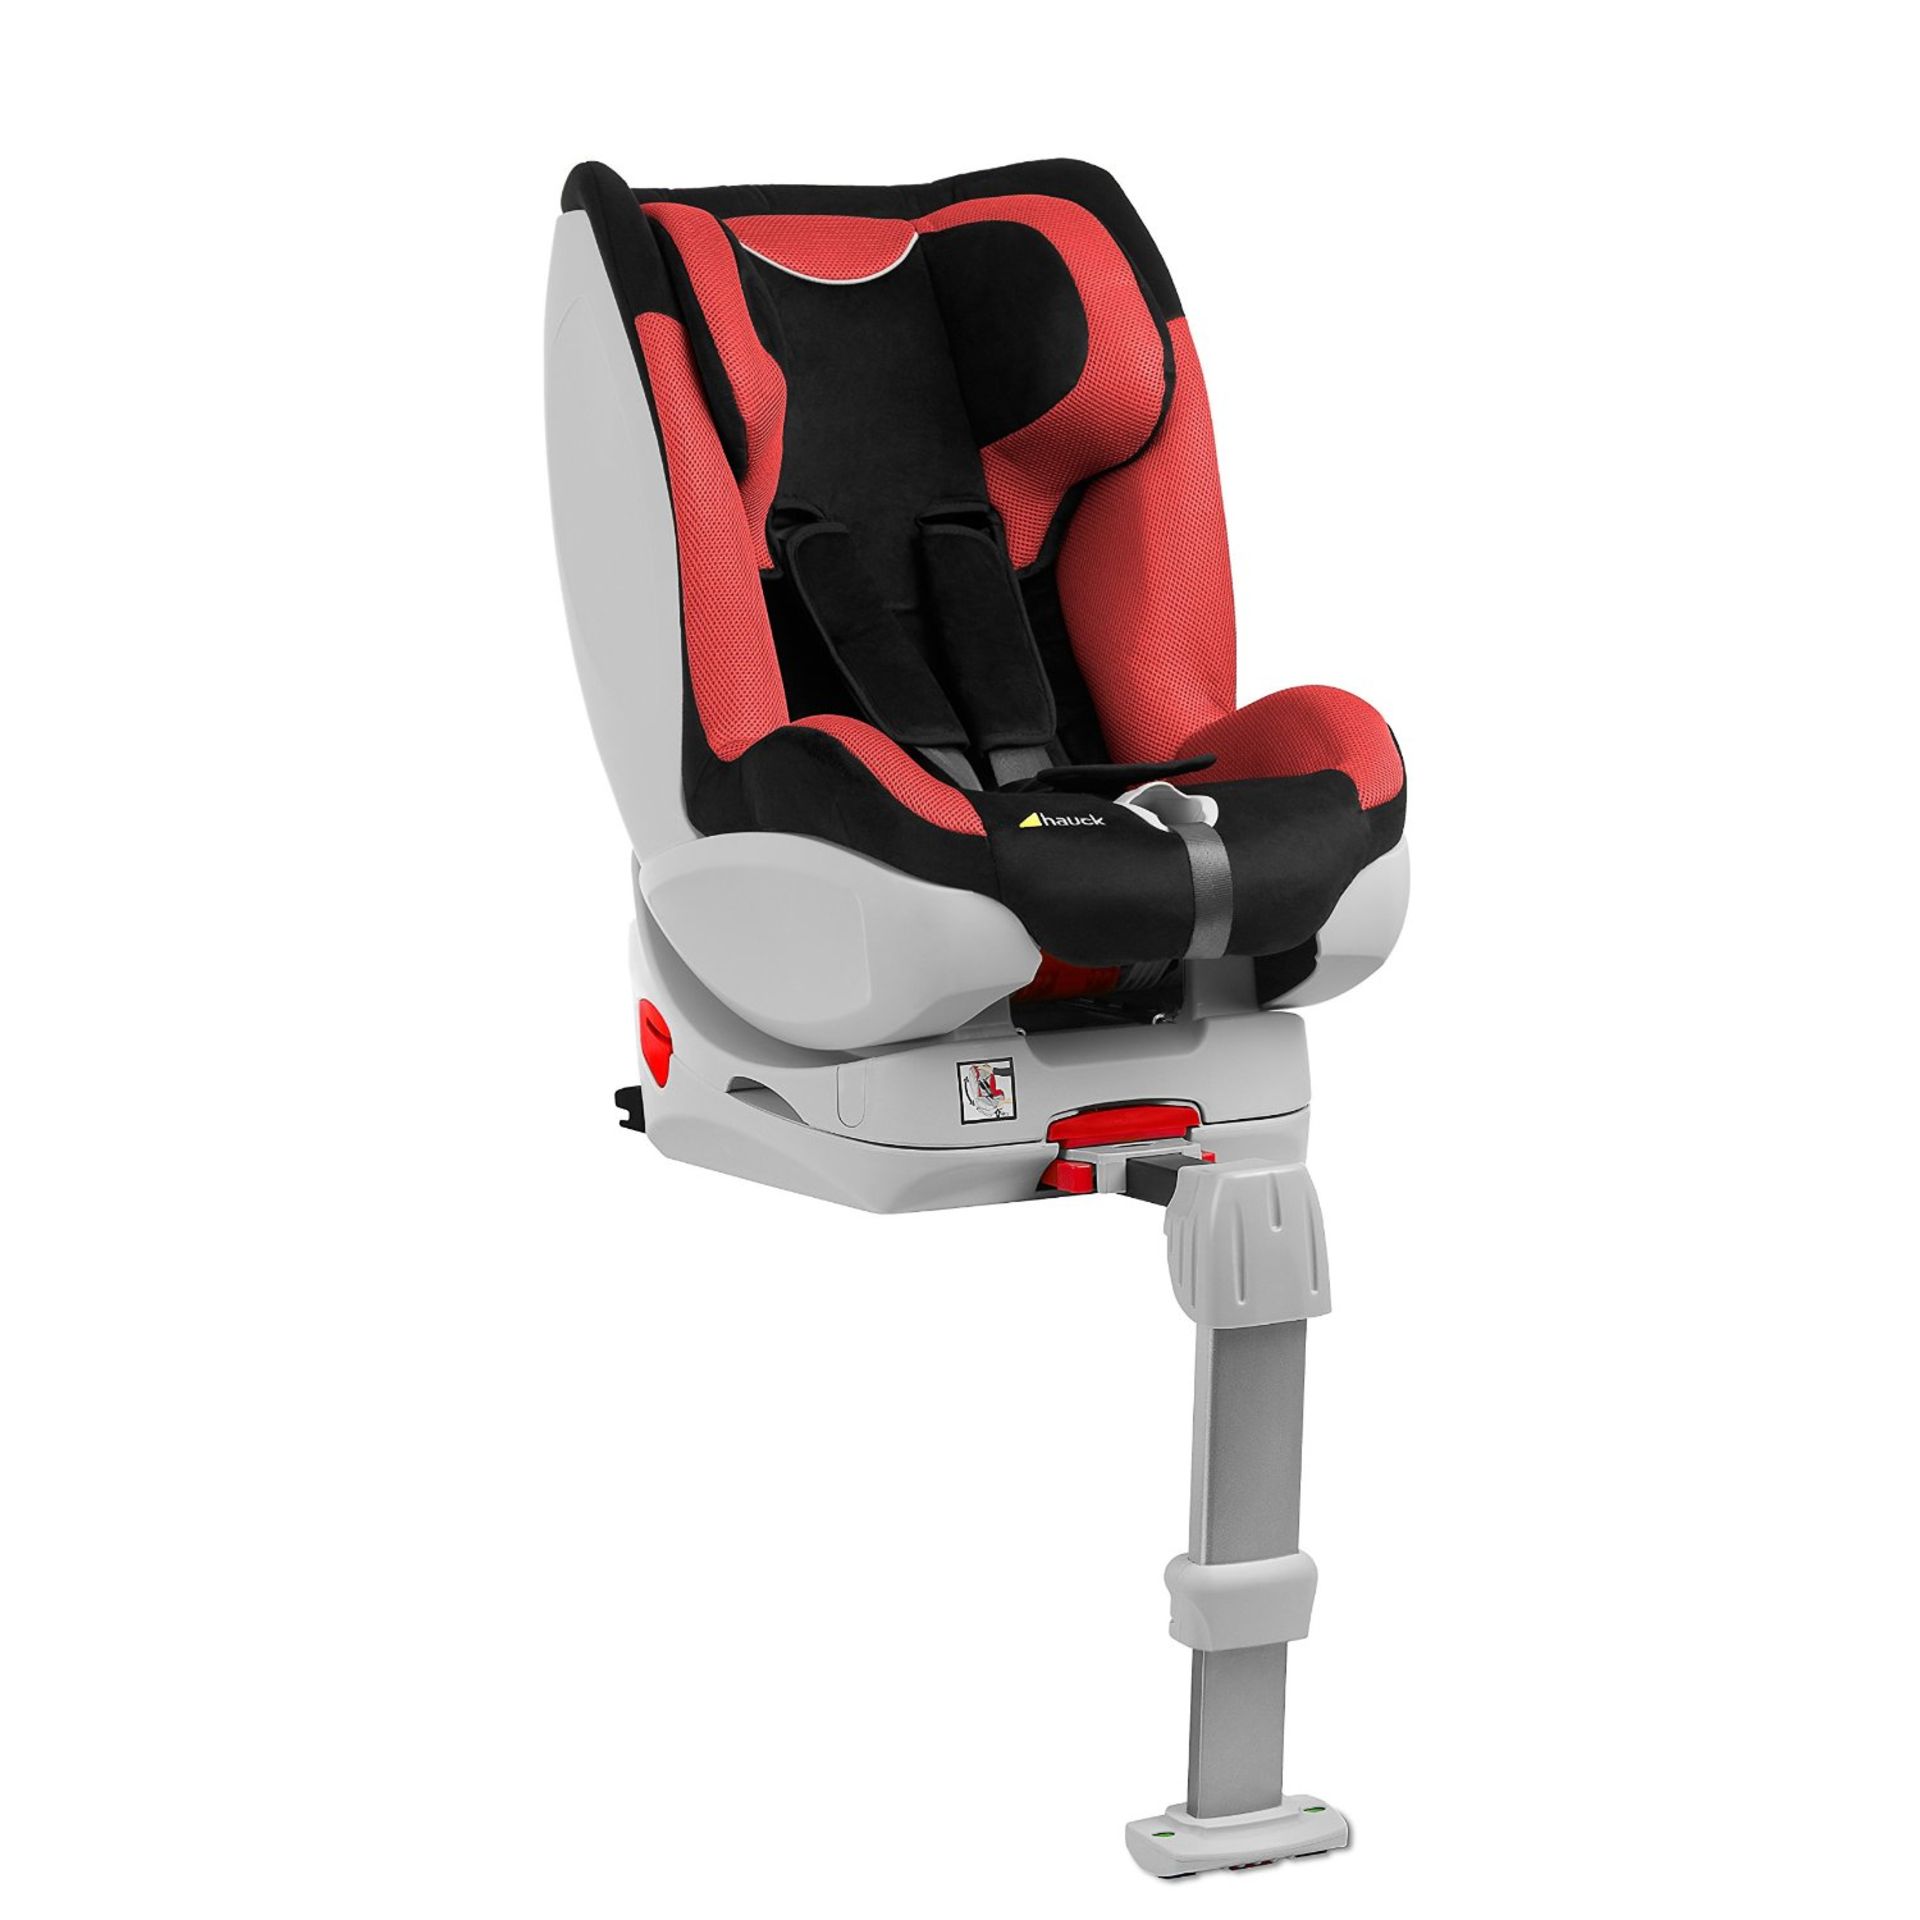 BRAND NEW Hauck Varioguard Group 0+/1 Car Seat - Black/Red RRP £219.99